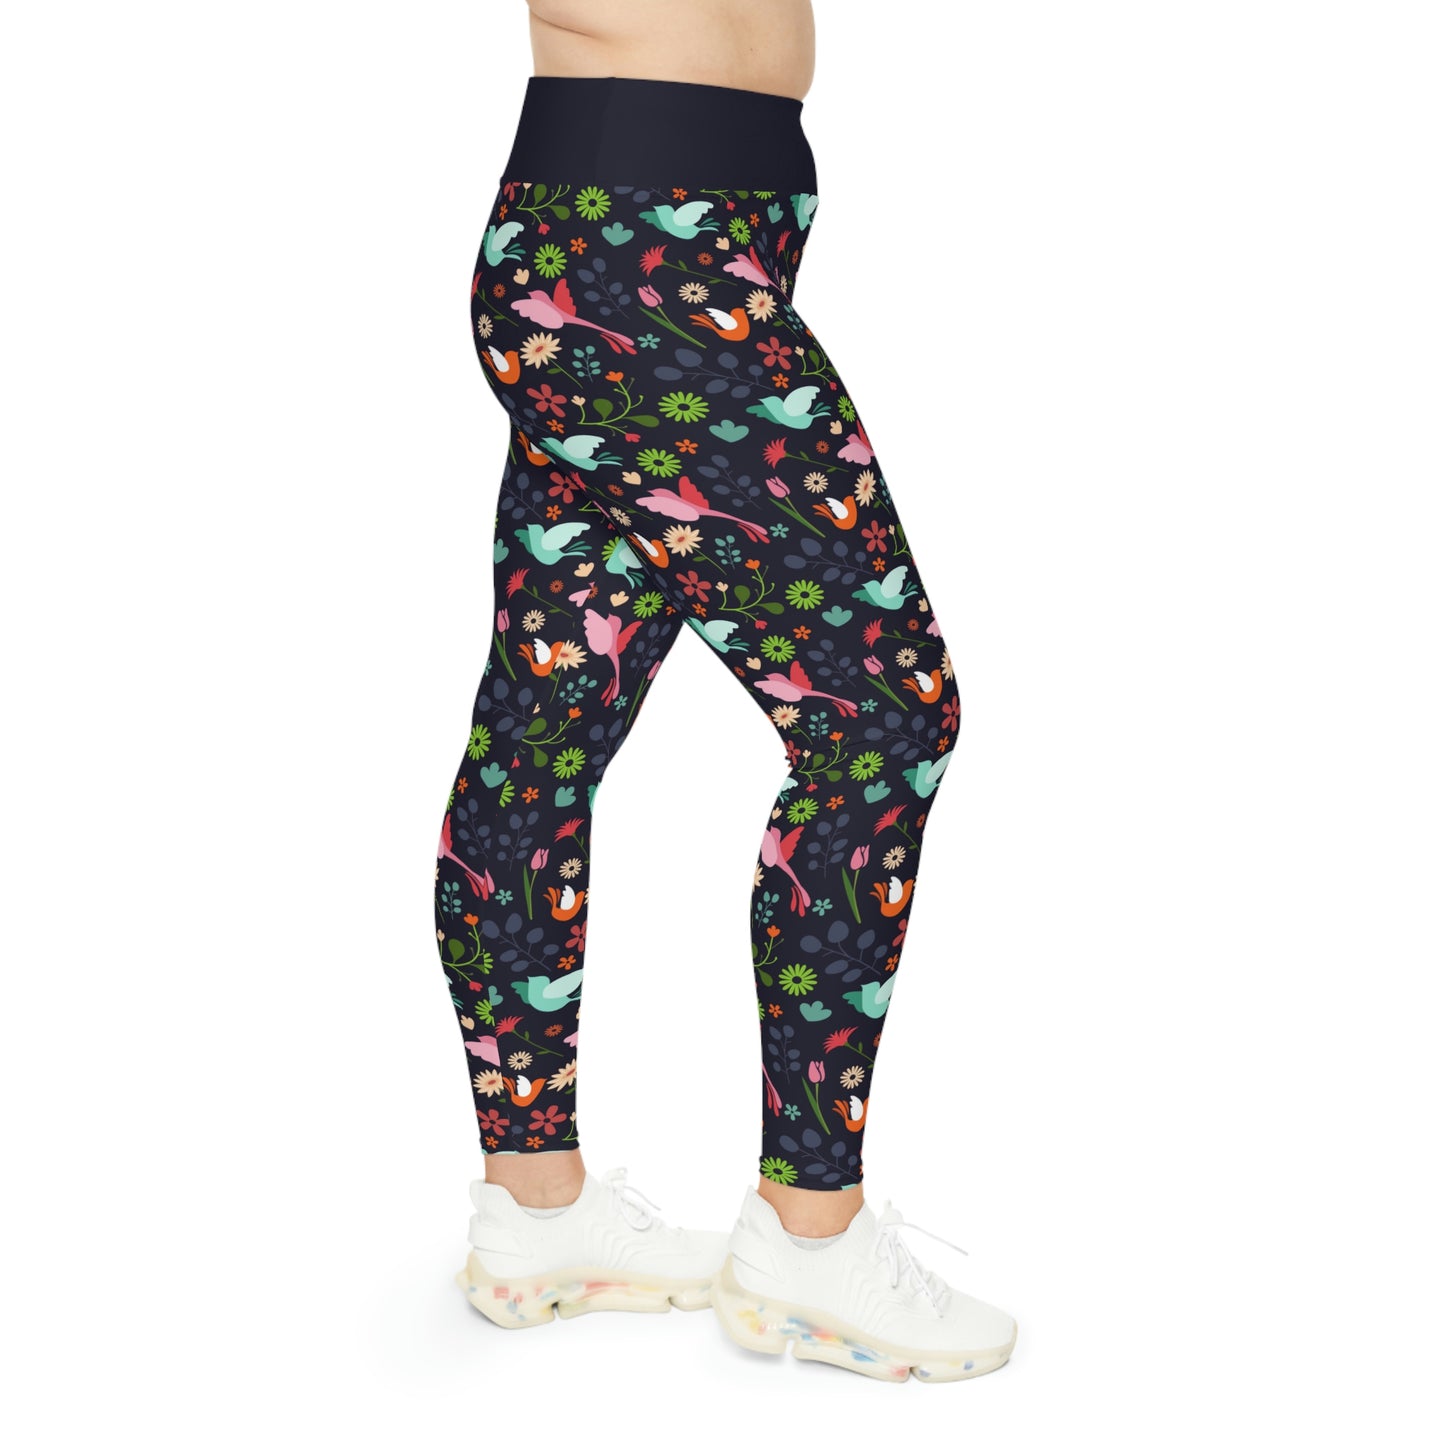 Hummingbirds Plus Size Leggings animal kingdom, Safari Leggings, One of a Kind Gift - Workout Activewear tights for Wife, Friend, mom and me tights Christmas Gift